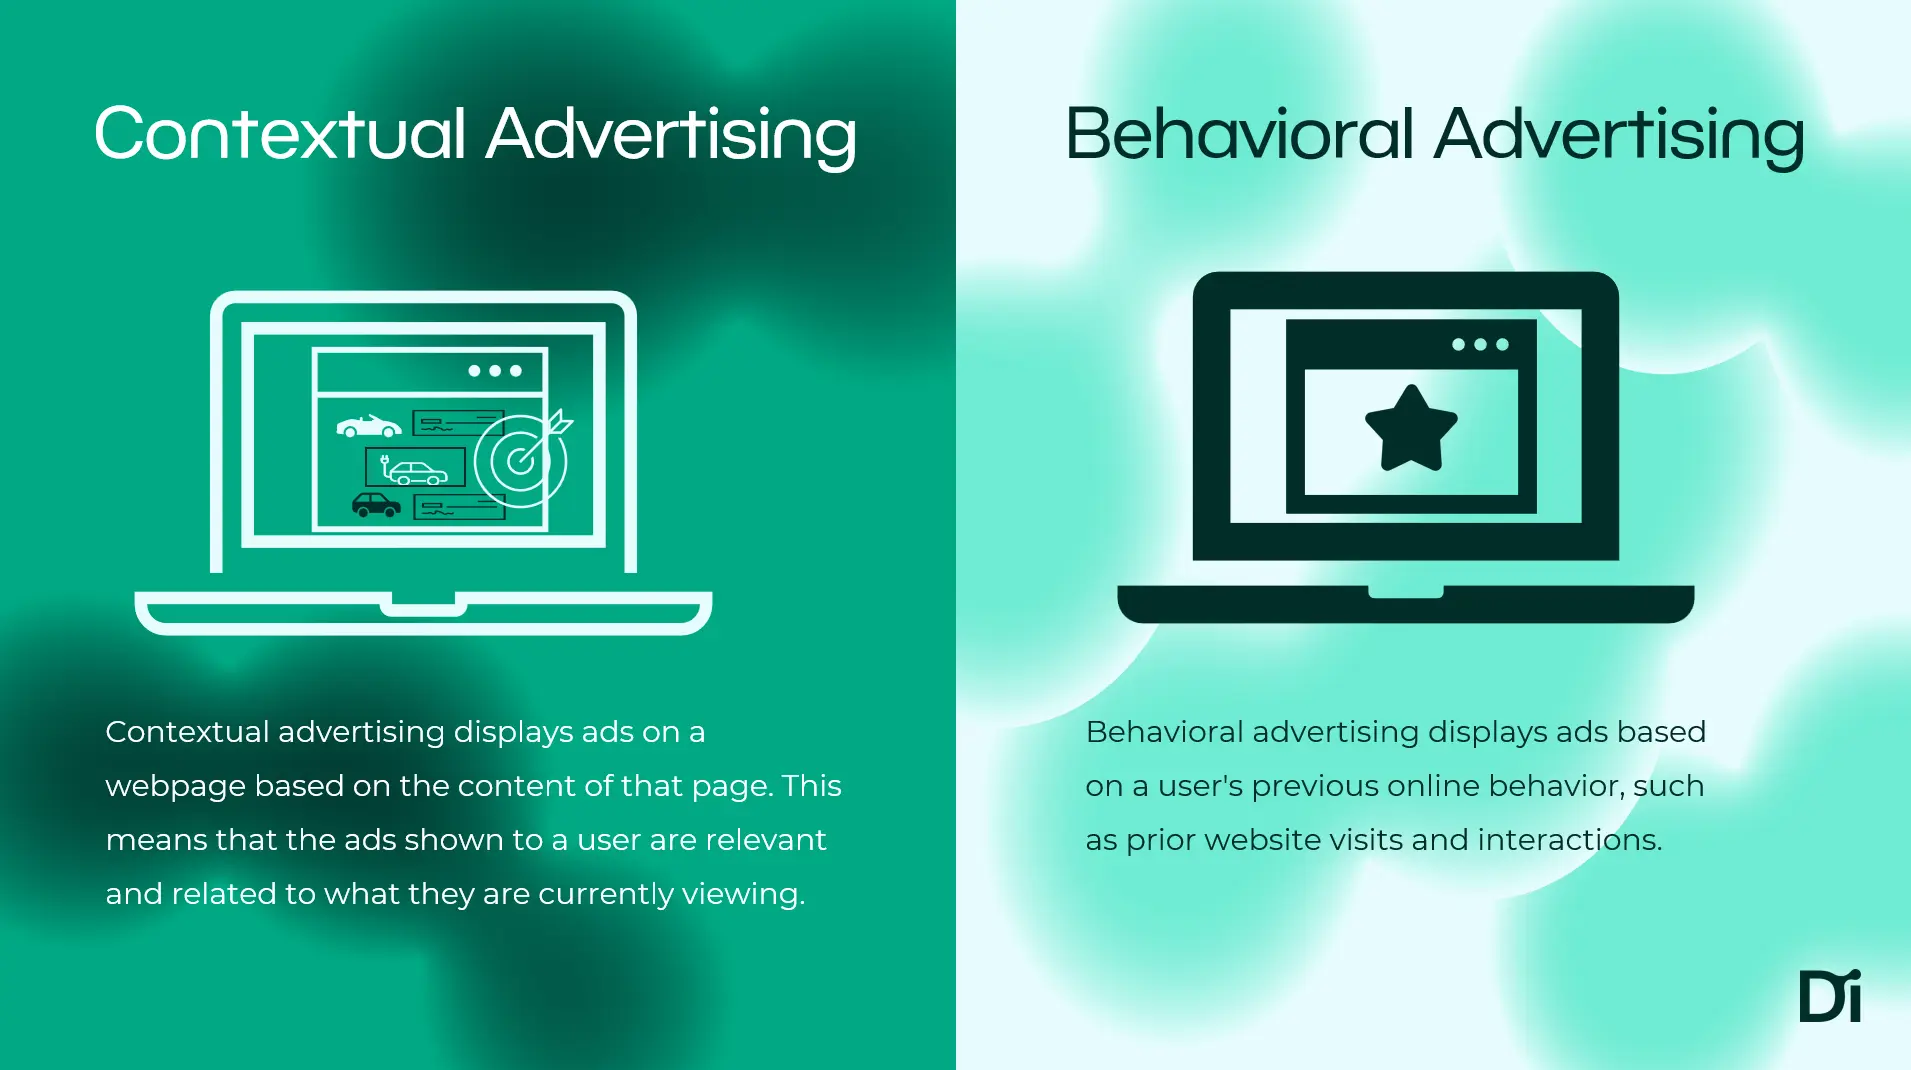 Key differences between Contextual and Behavioral advertising